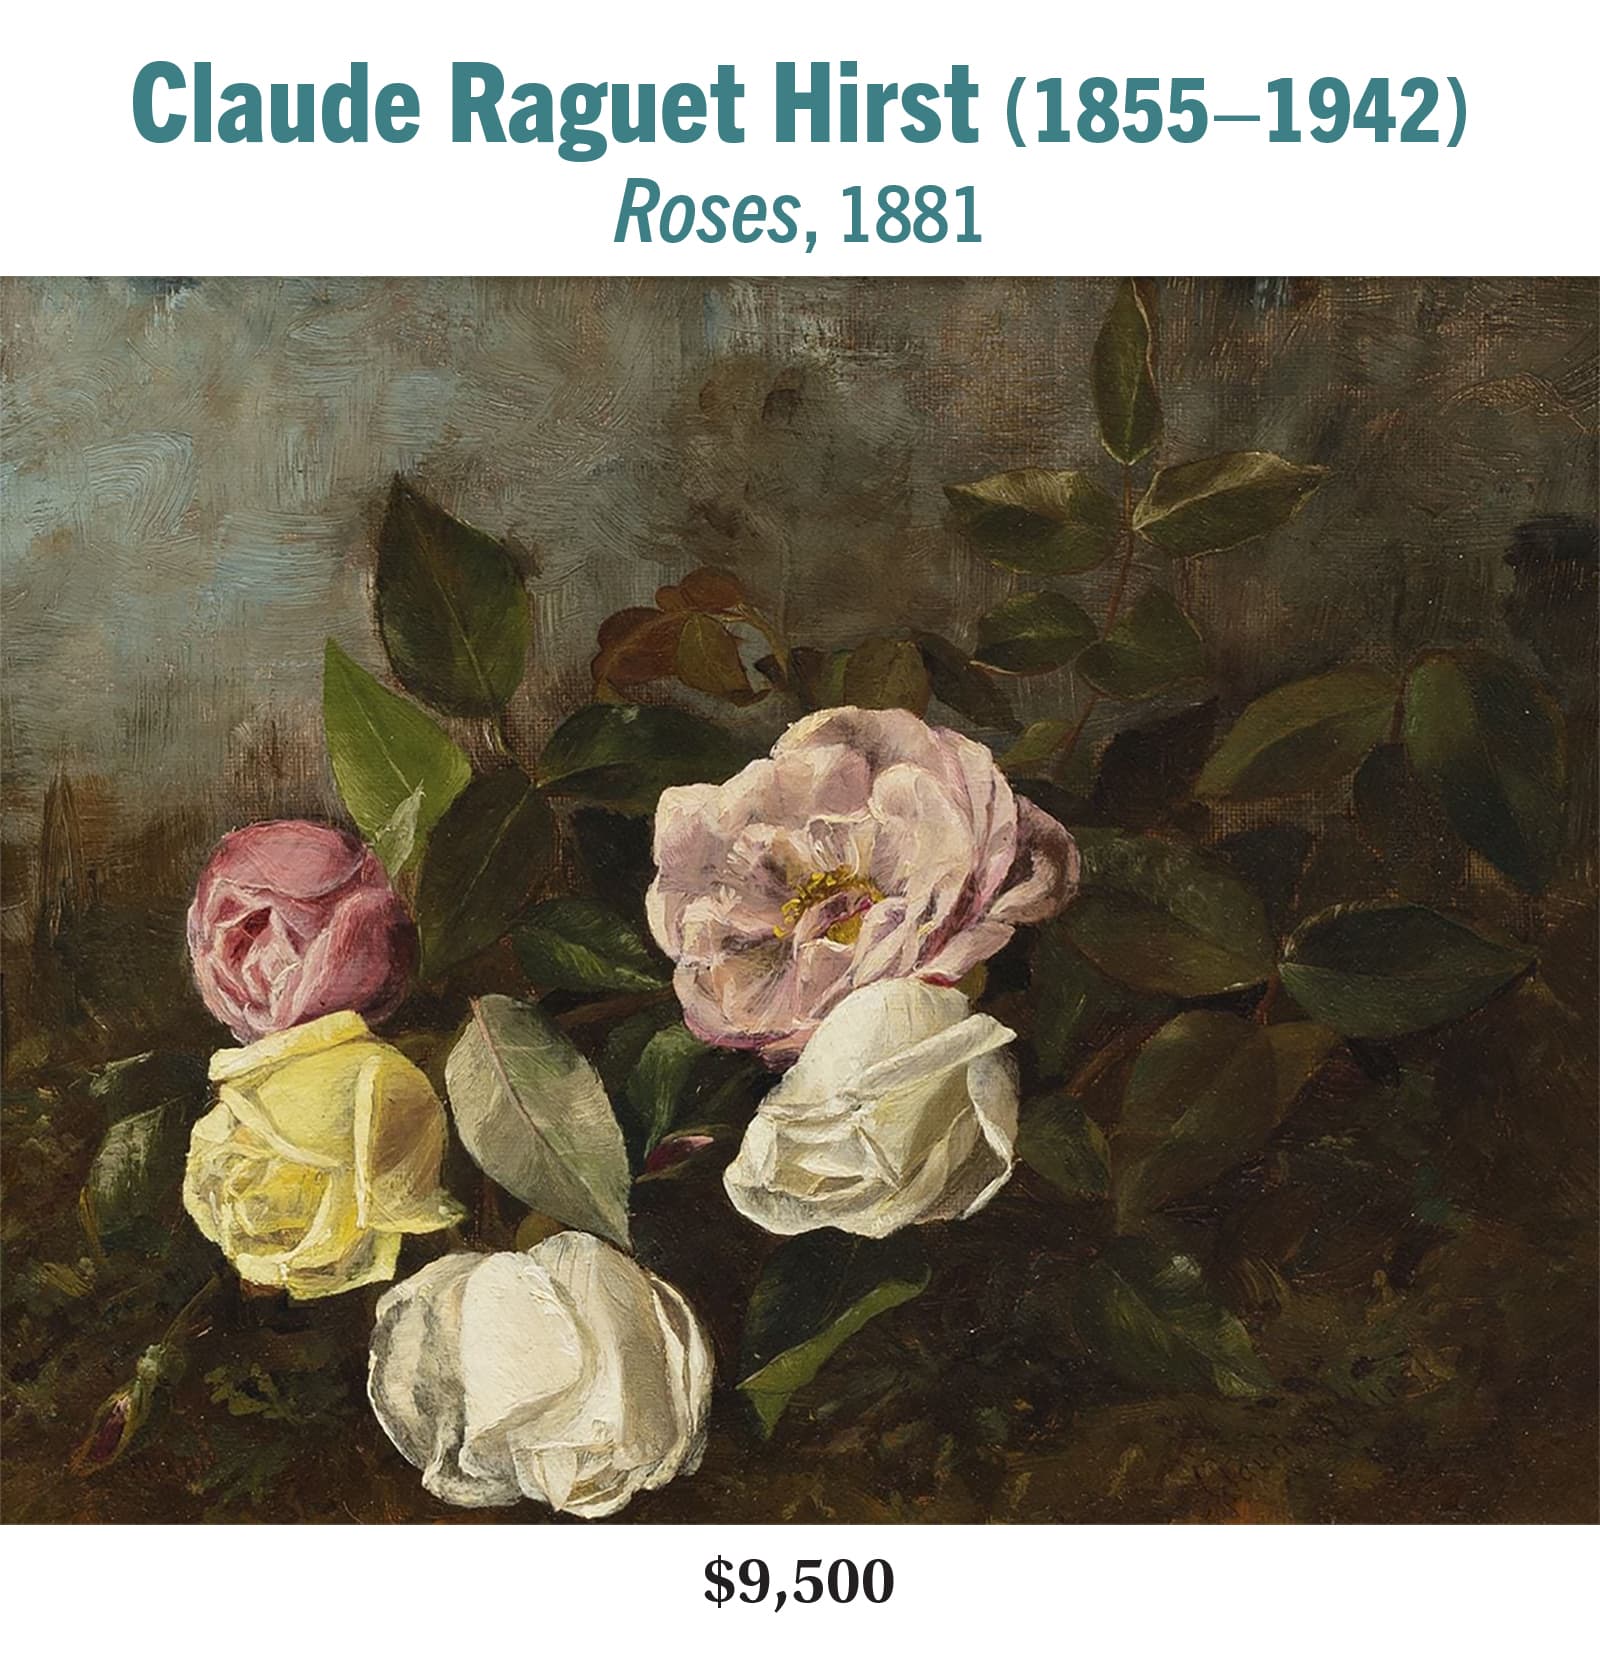 Claude Raguet Hirst 18551942 Roses 1881 oil on canvas American impressionist still life painting